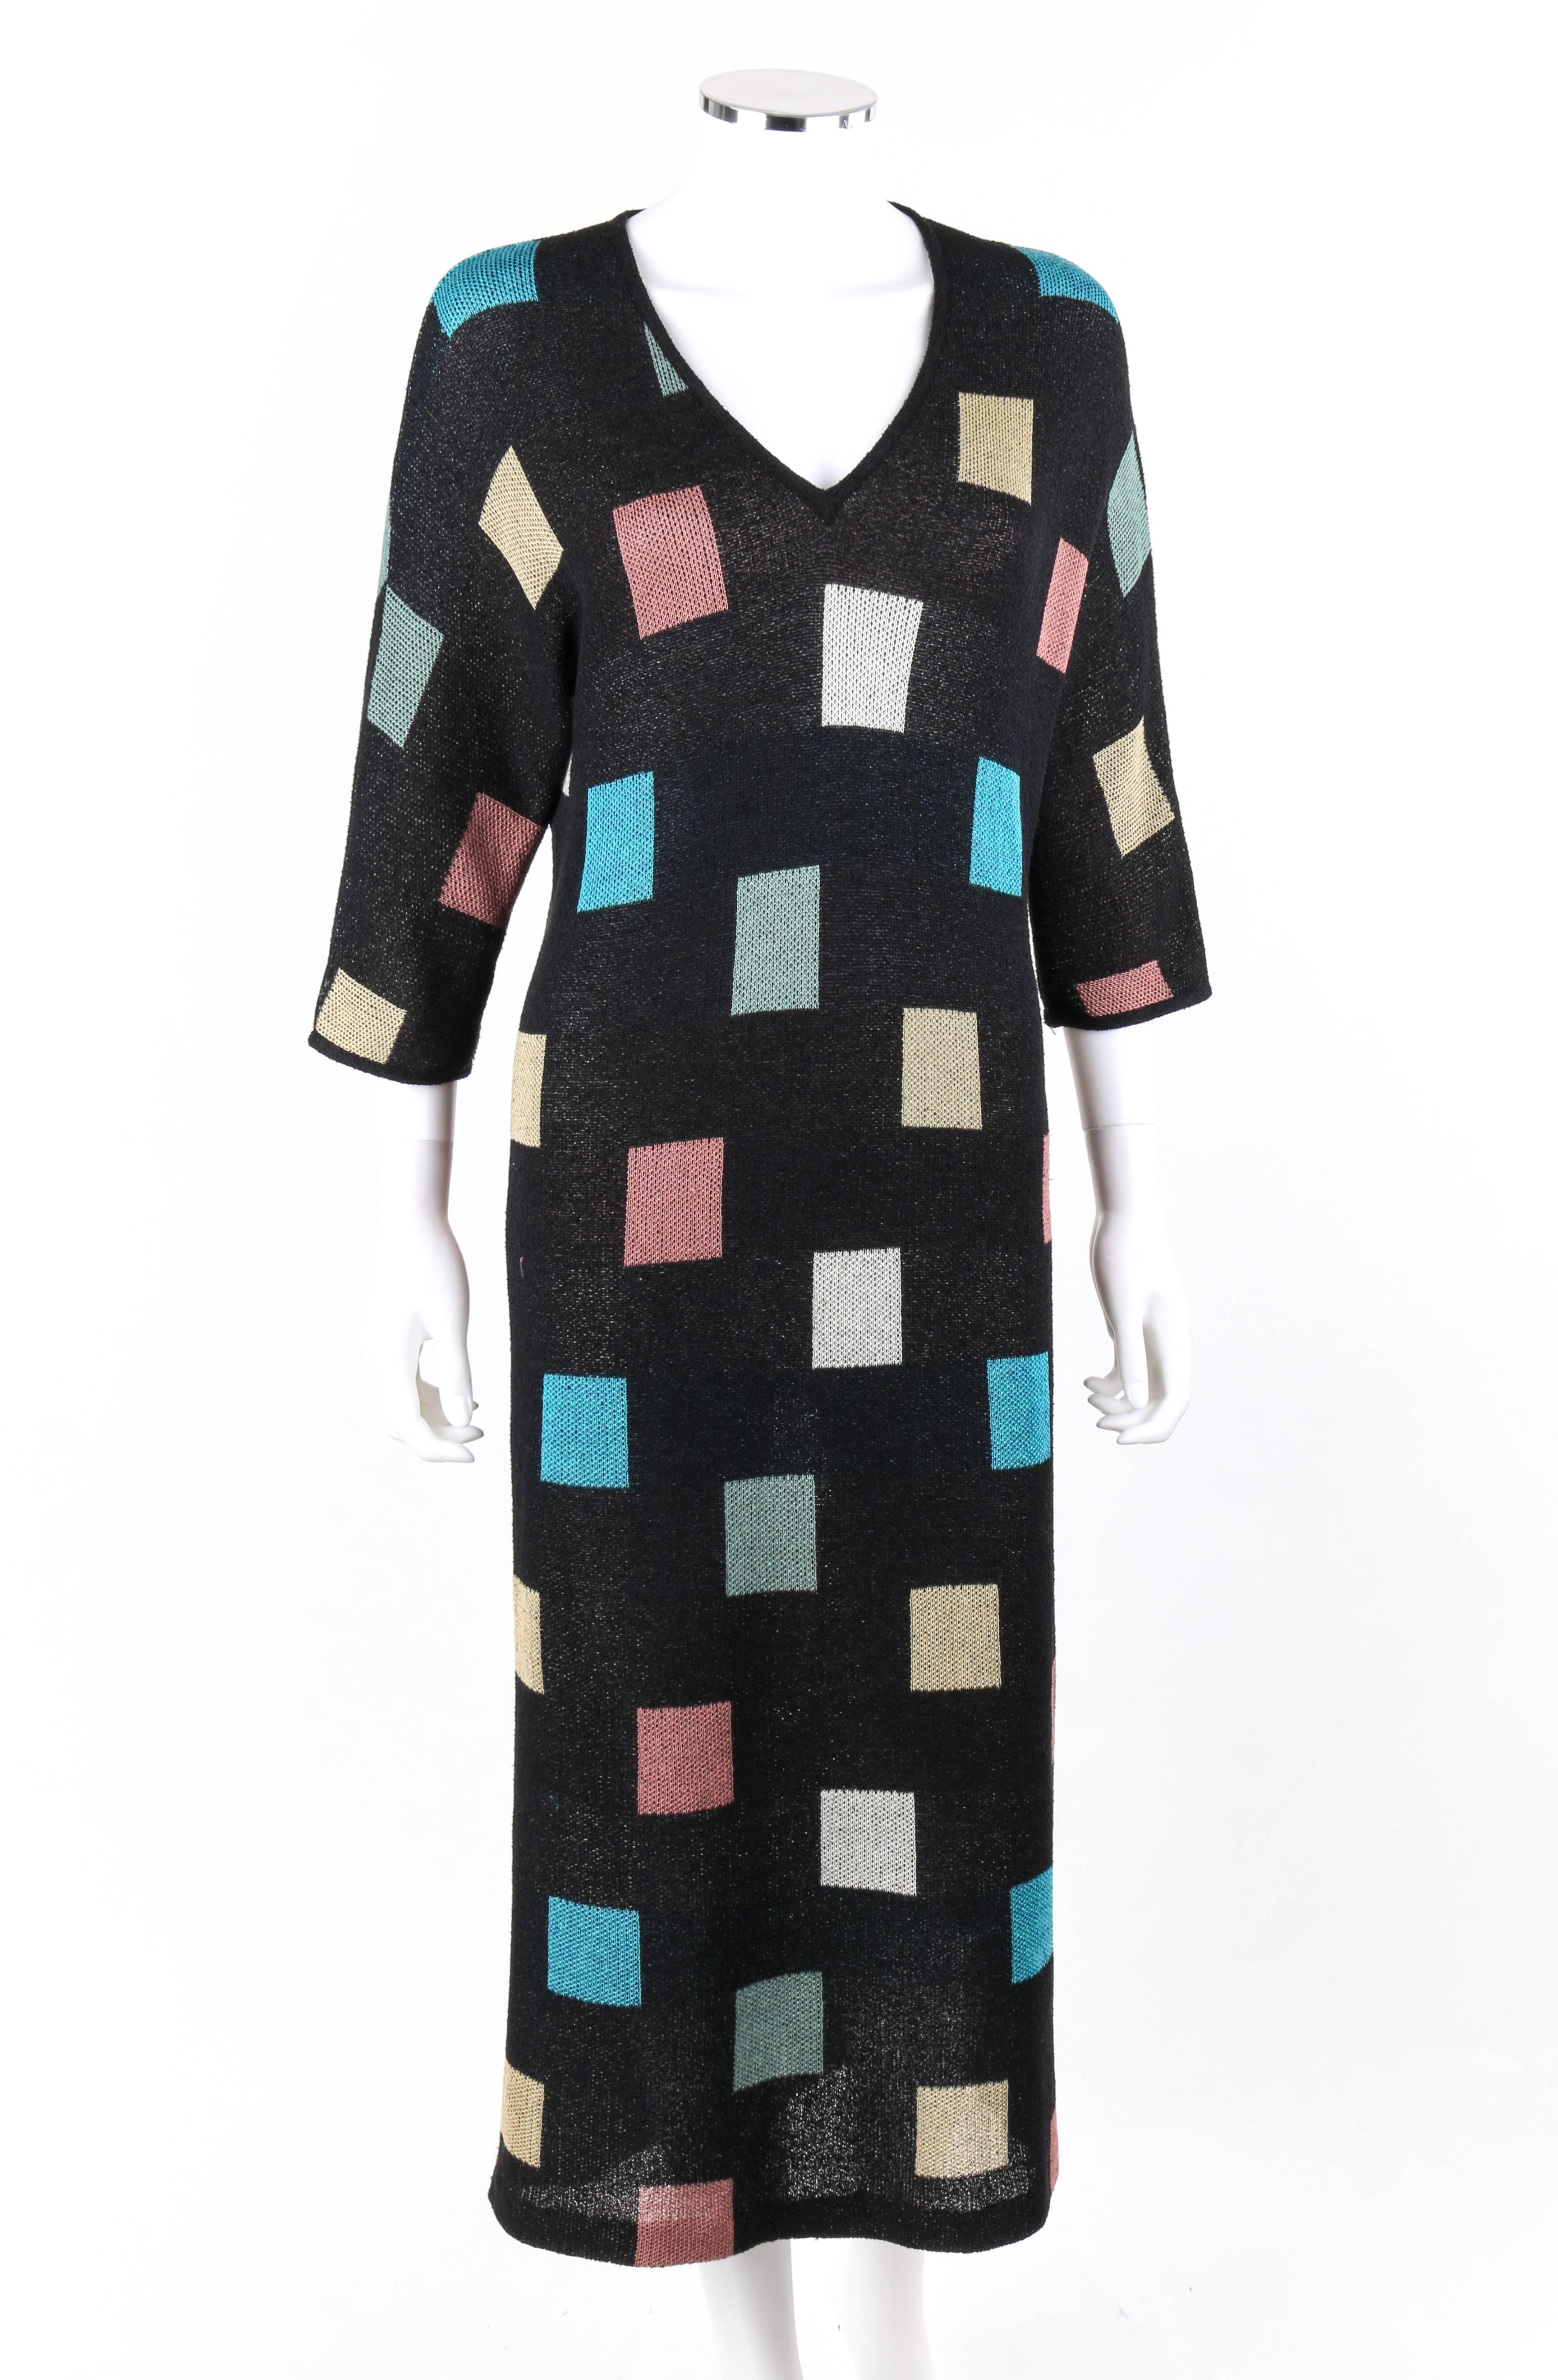 Vintage Missoni Spring / Summer 1984 black multi-color square pattern knit v-neck maxi dress. Designed by Ottavio and Rosita Missoni. Black double knit with square pattern in shades of white, pink, yellow, green, and blue. V-neckline. 3/4 length